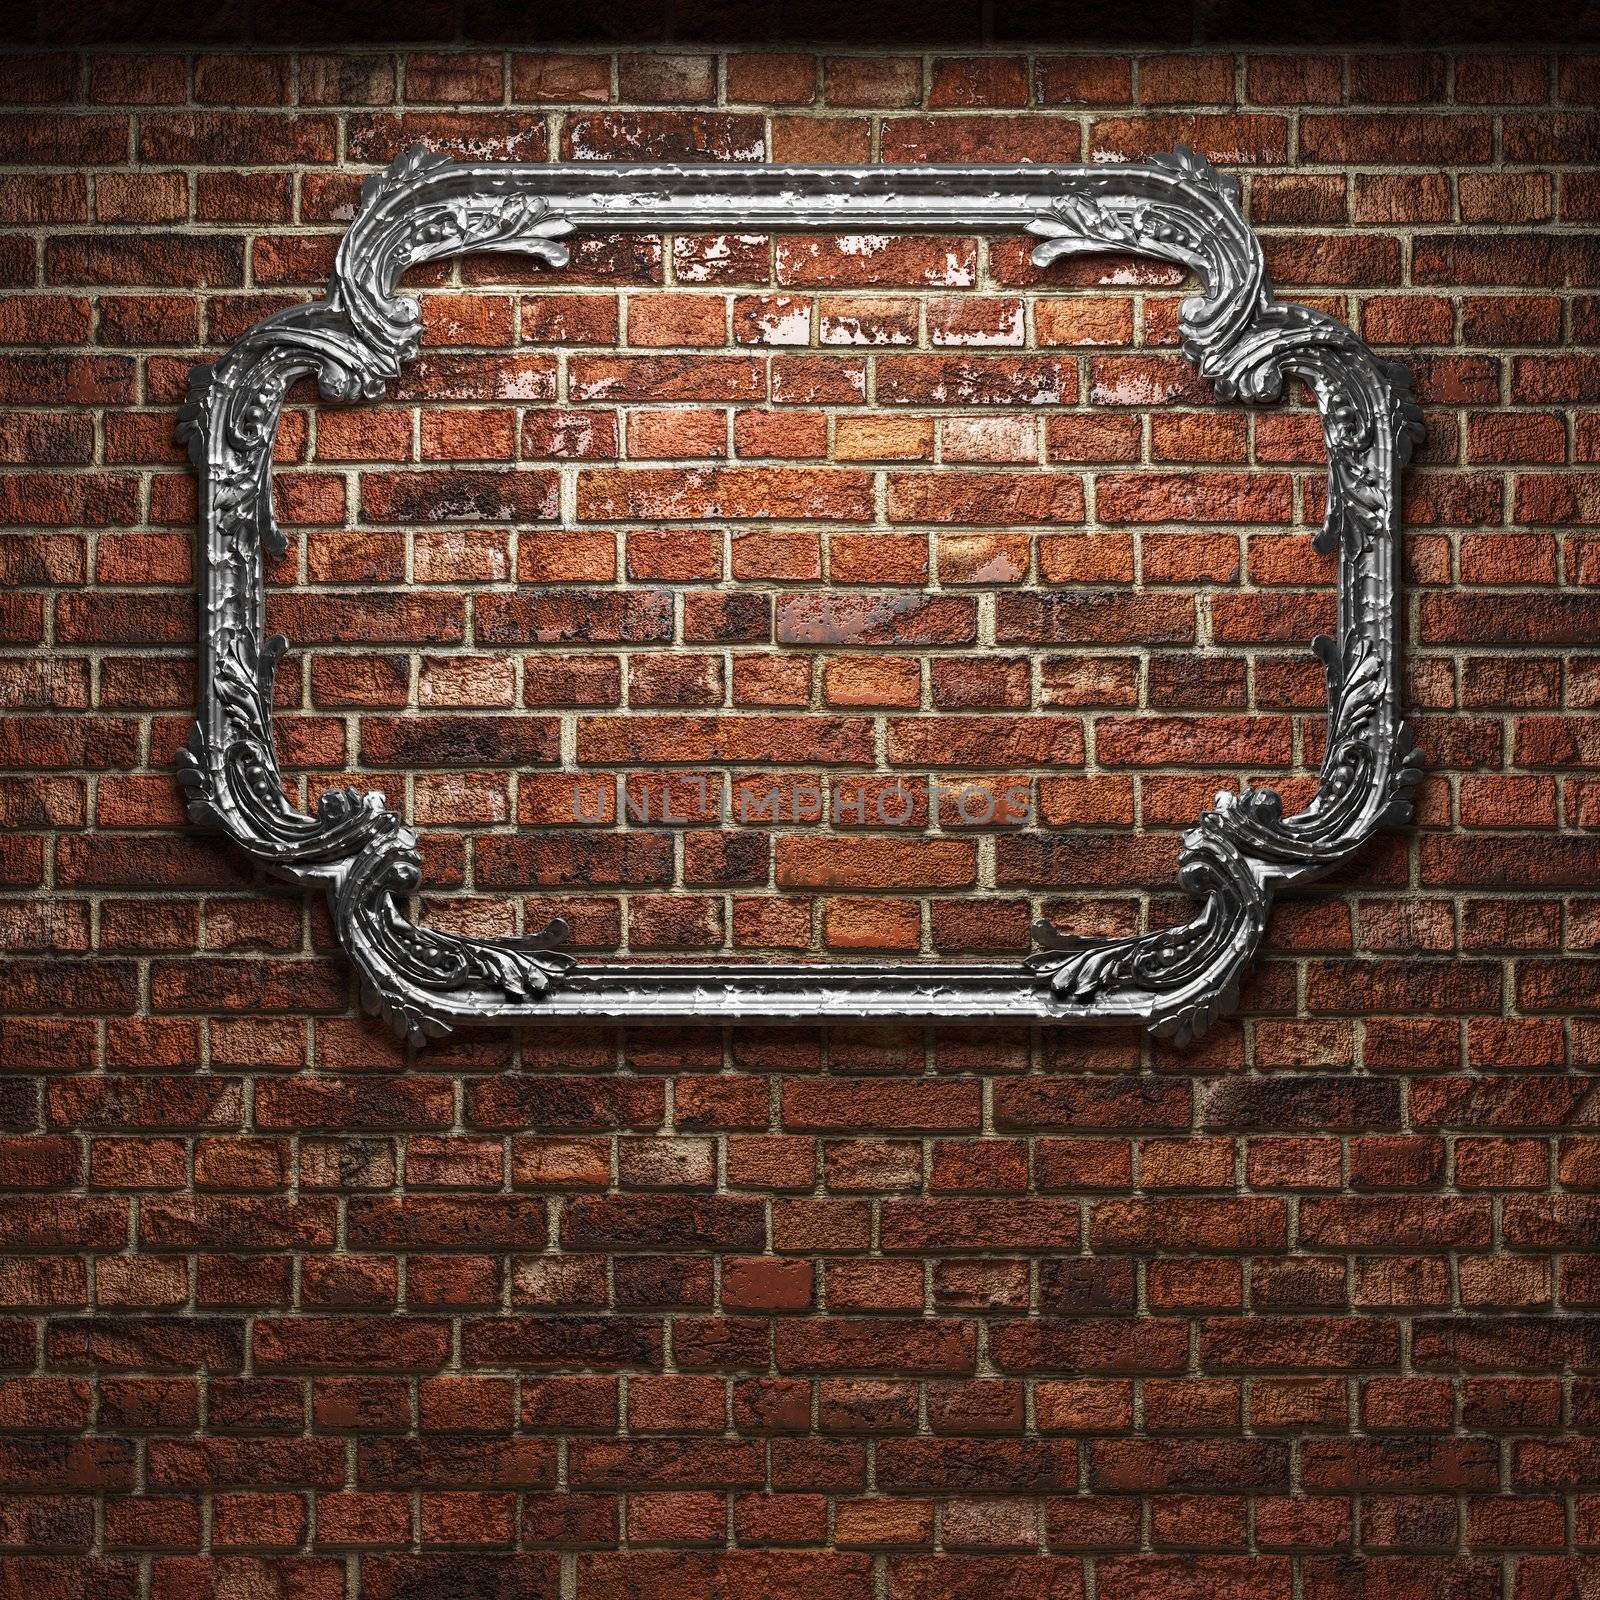 illuminated brick wall and frame made in 3D